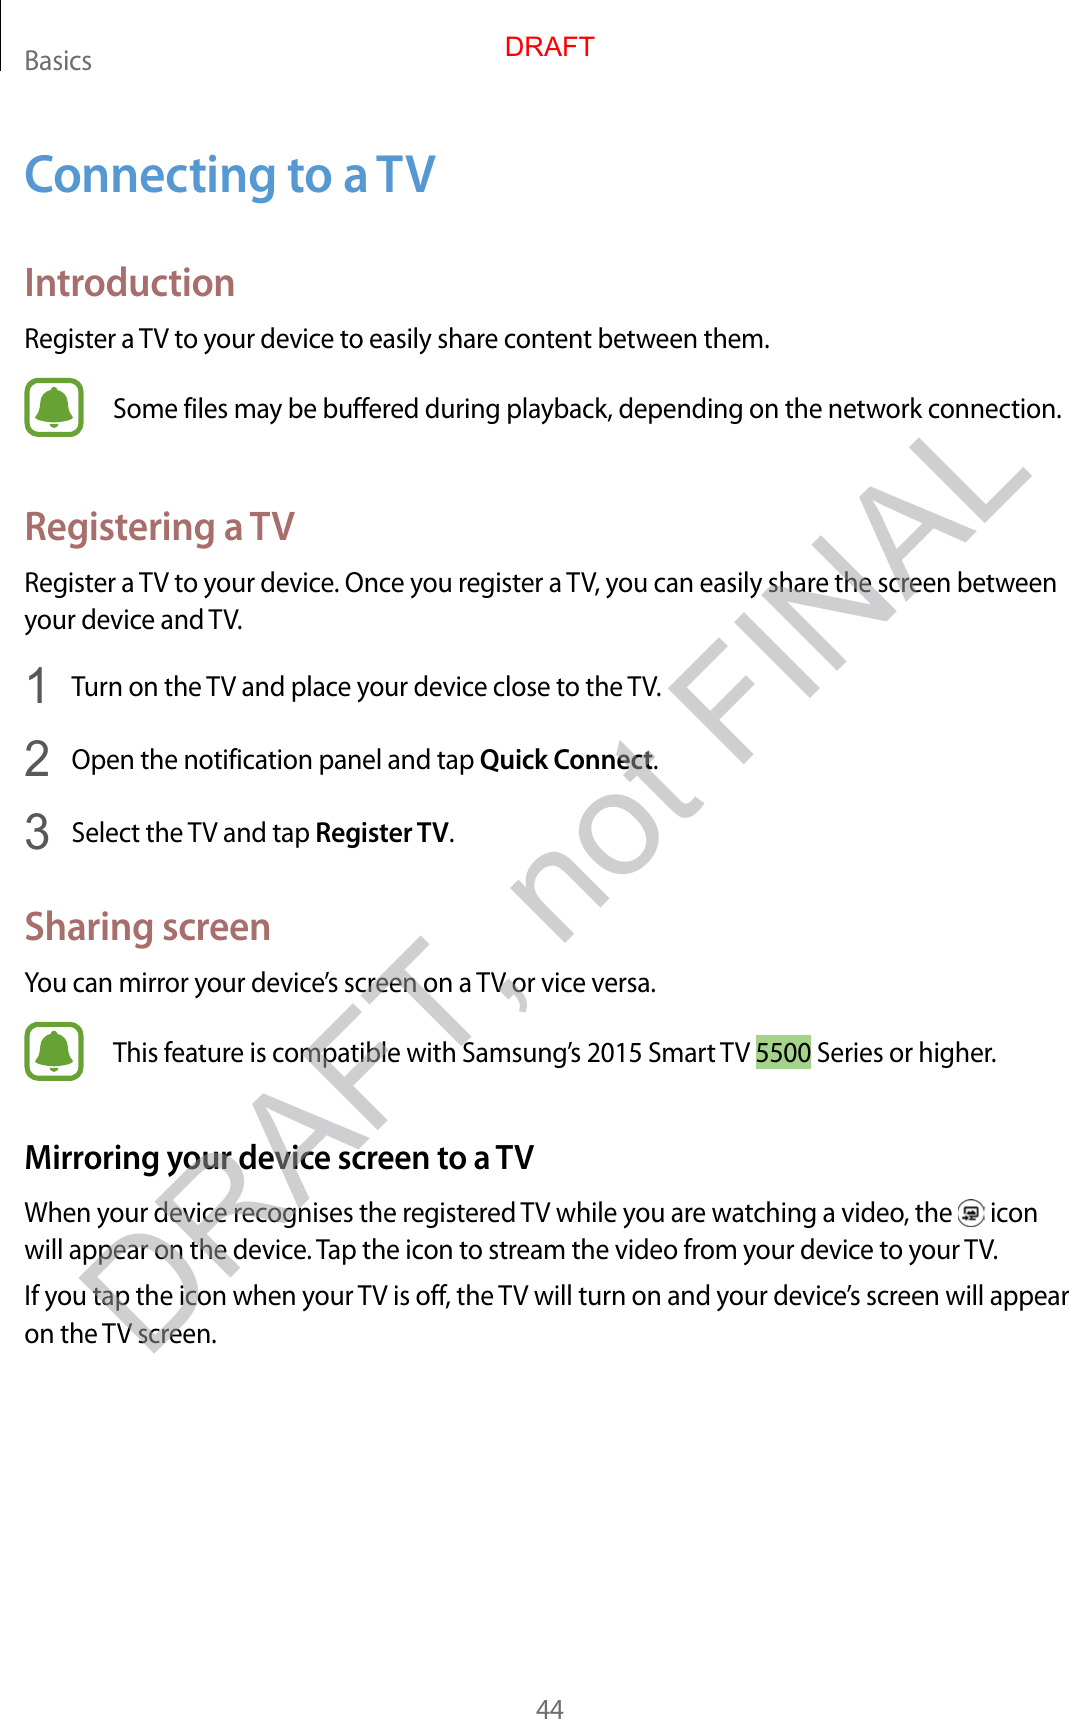 Basics44C onnecting to a TVIntroductionRegister a TV to your device t o easily shar e c ont ent between them.Some files may be buffer ed during pla yback, depending on the network connection.Registering a TVRegister a TV to your device. Once you reg ister a TV, you can easily shar e the scr een between your device and TV.1  Turn on the TV and place your device close to the TV.2  Open the notification panel and tap Quick Connect.3  Select the TV and tap Register TV.Sharing screenYou can mirror your device’s screen on a TV or vice versa.This f eatur e is c ompatible with Samsung’s 2015 Smart TV 5500 Series or higher.Mirroring your de vic e screen t o a TVWhen your devic e r ecog nises the r eg ister ed TV while you are wat ching a video, the   icon will appear on the device . Tap the icon to stream the video from y our devic e t o y our TV.If you tap the icon when your TV is off , the TV will turn on and your devic e’s screen will appear on the TV screen.DRAFTDRAFT, not FINAL